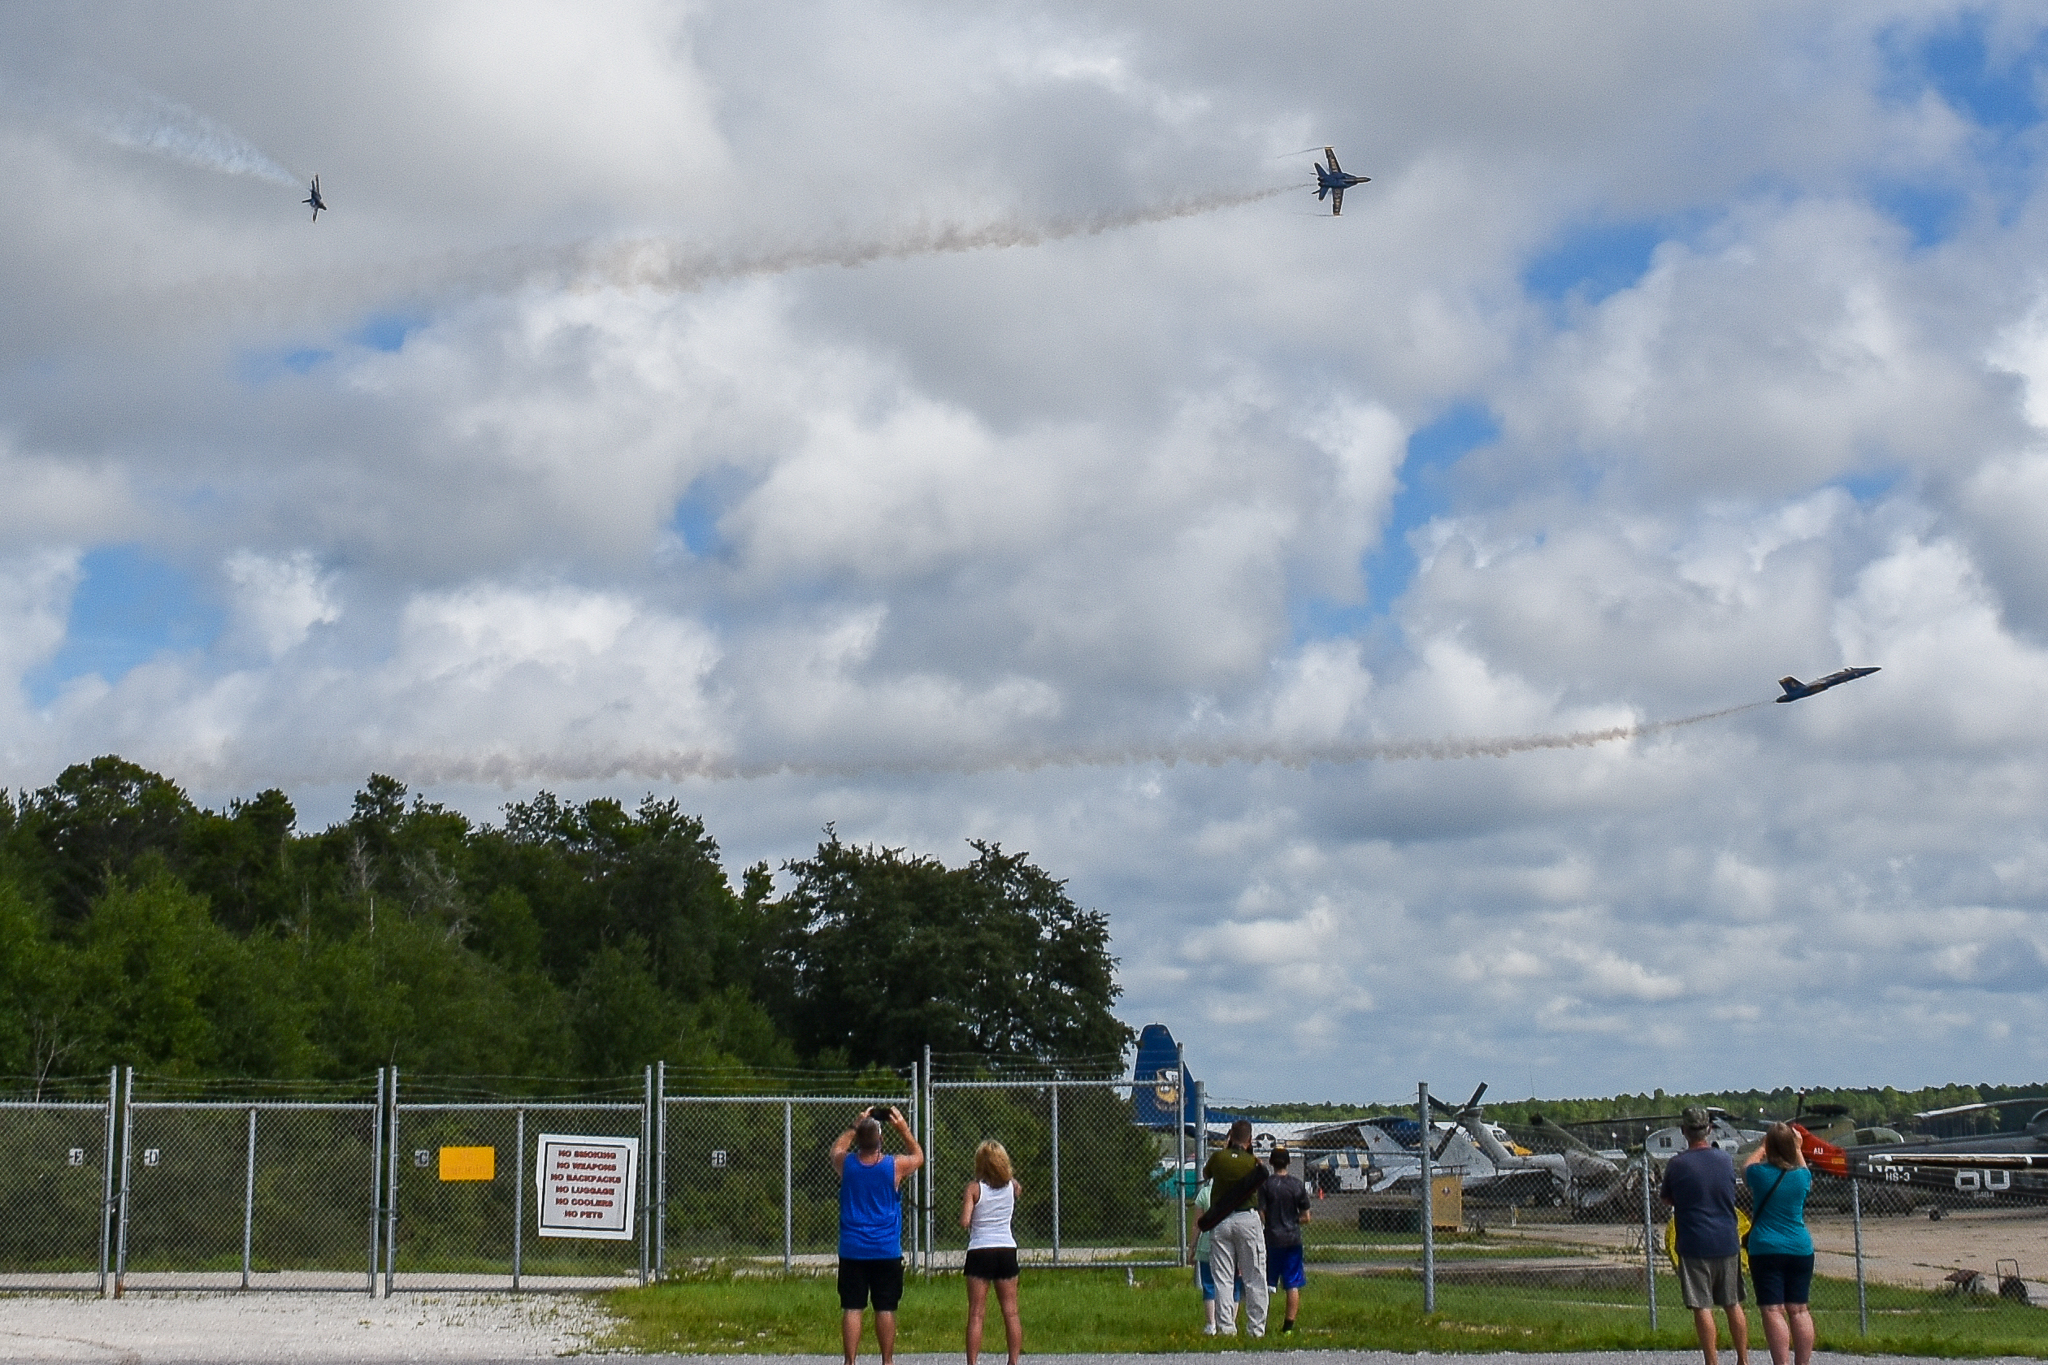 Blue Angels flight team practice on a cloudy day